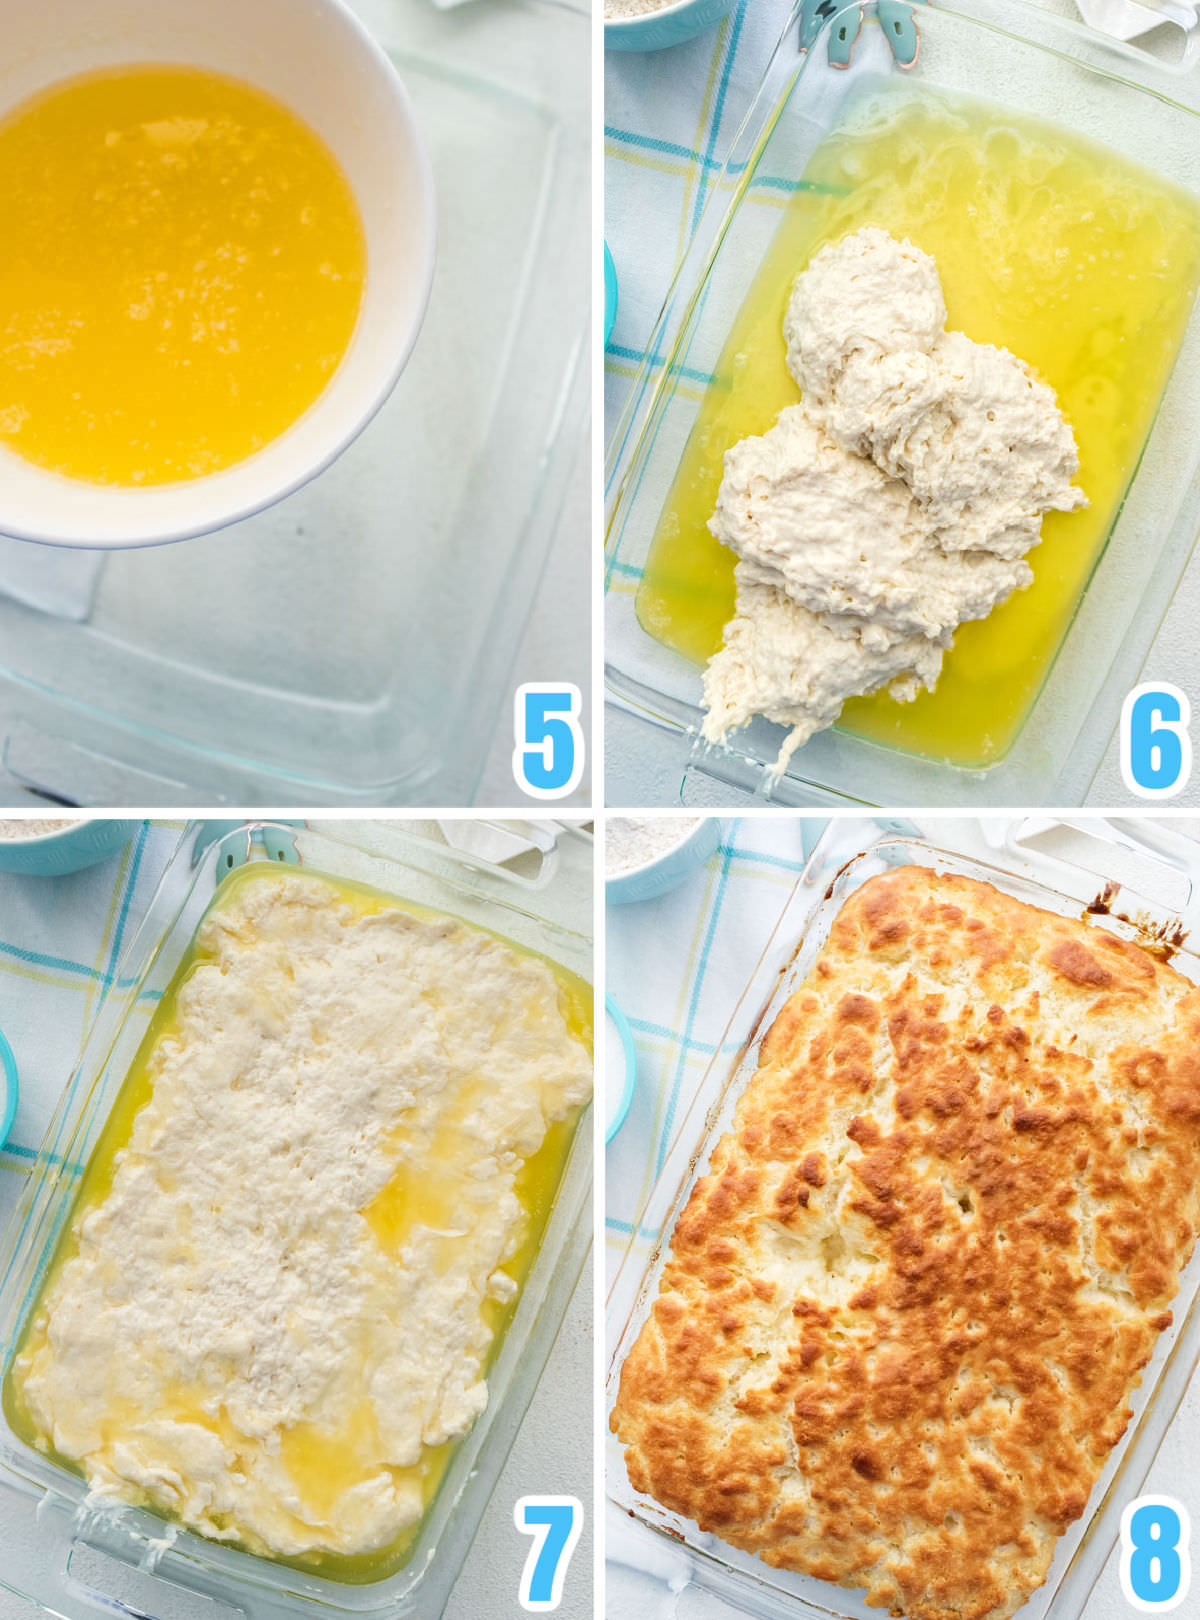 Collage image showing the steps for preparing the Butter Swim Biscuits for baking.